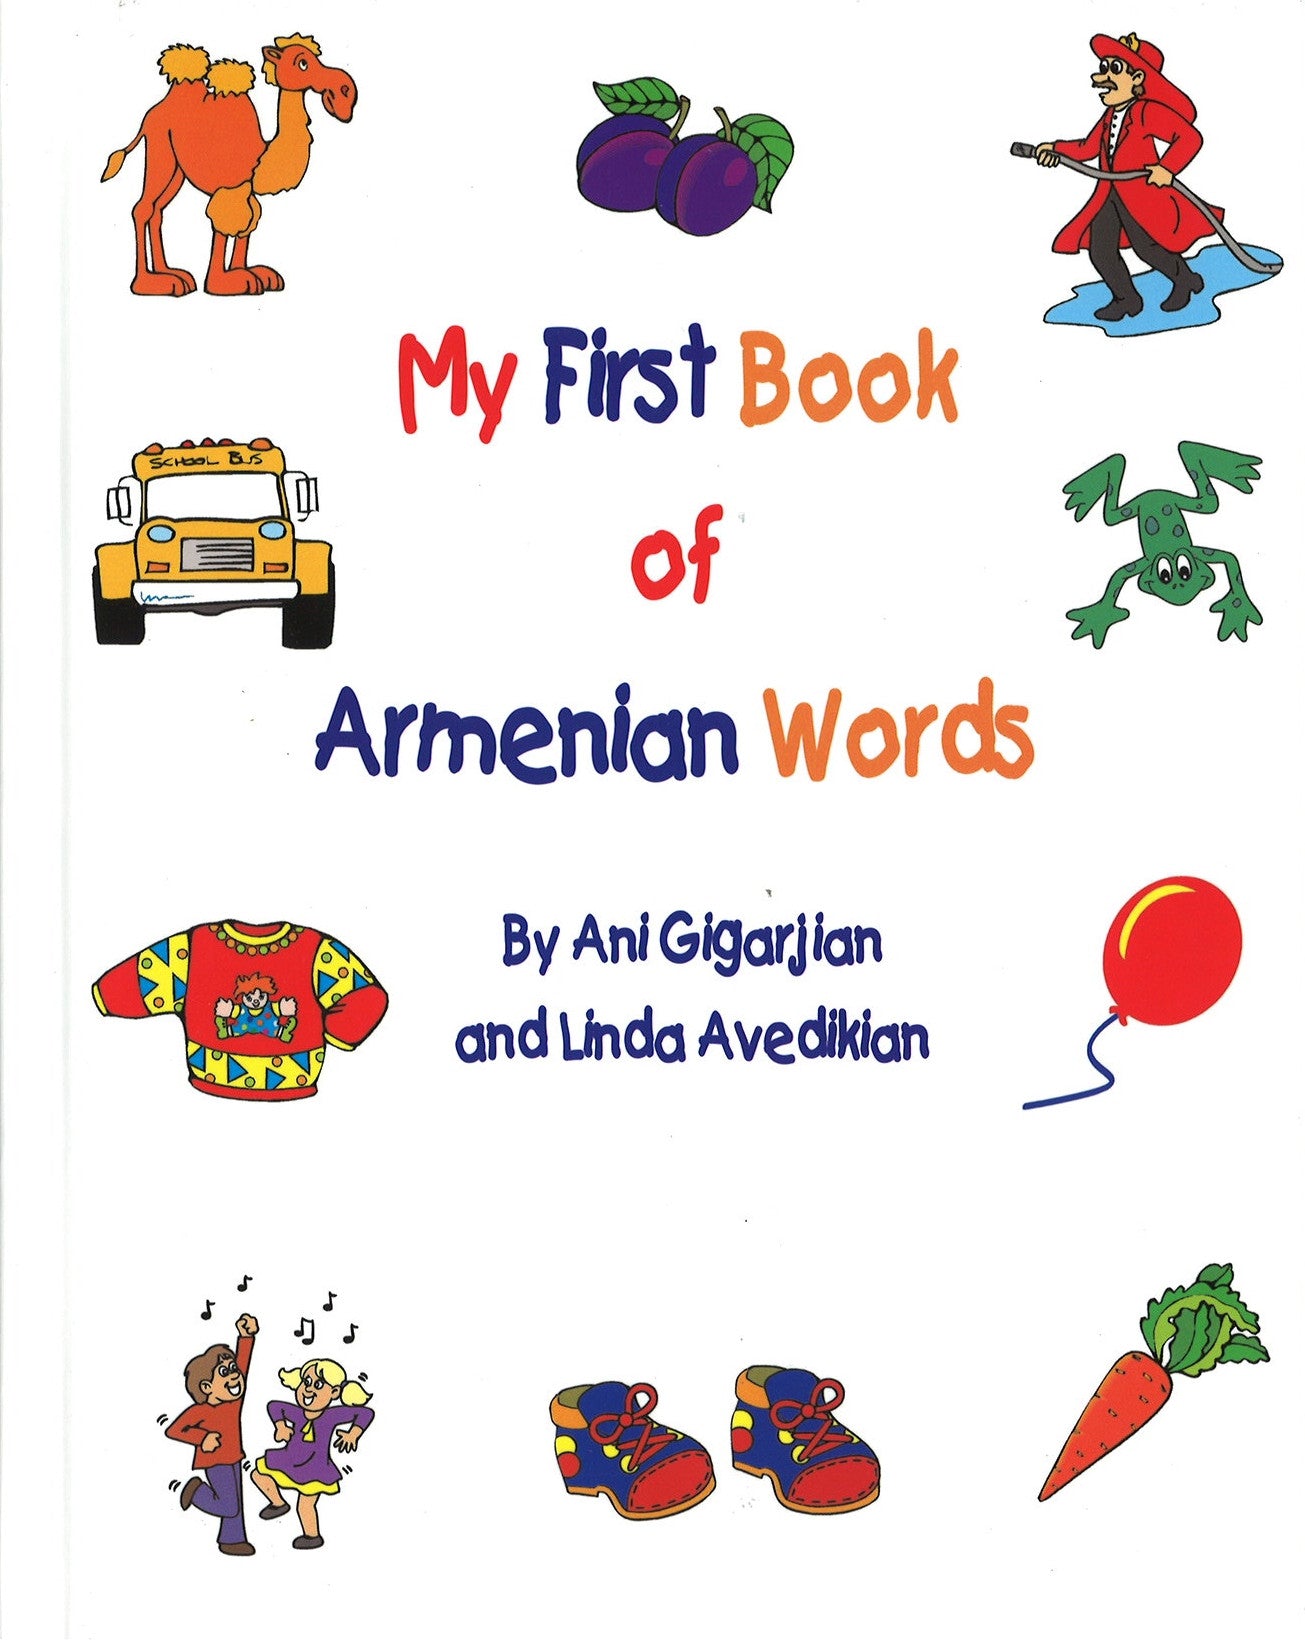 MY FIRST BOOK OF ARMENIAN WORDS